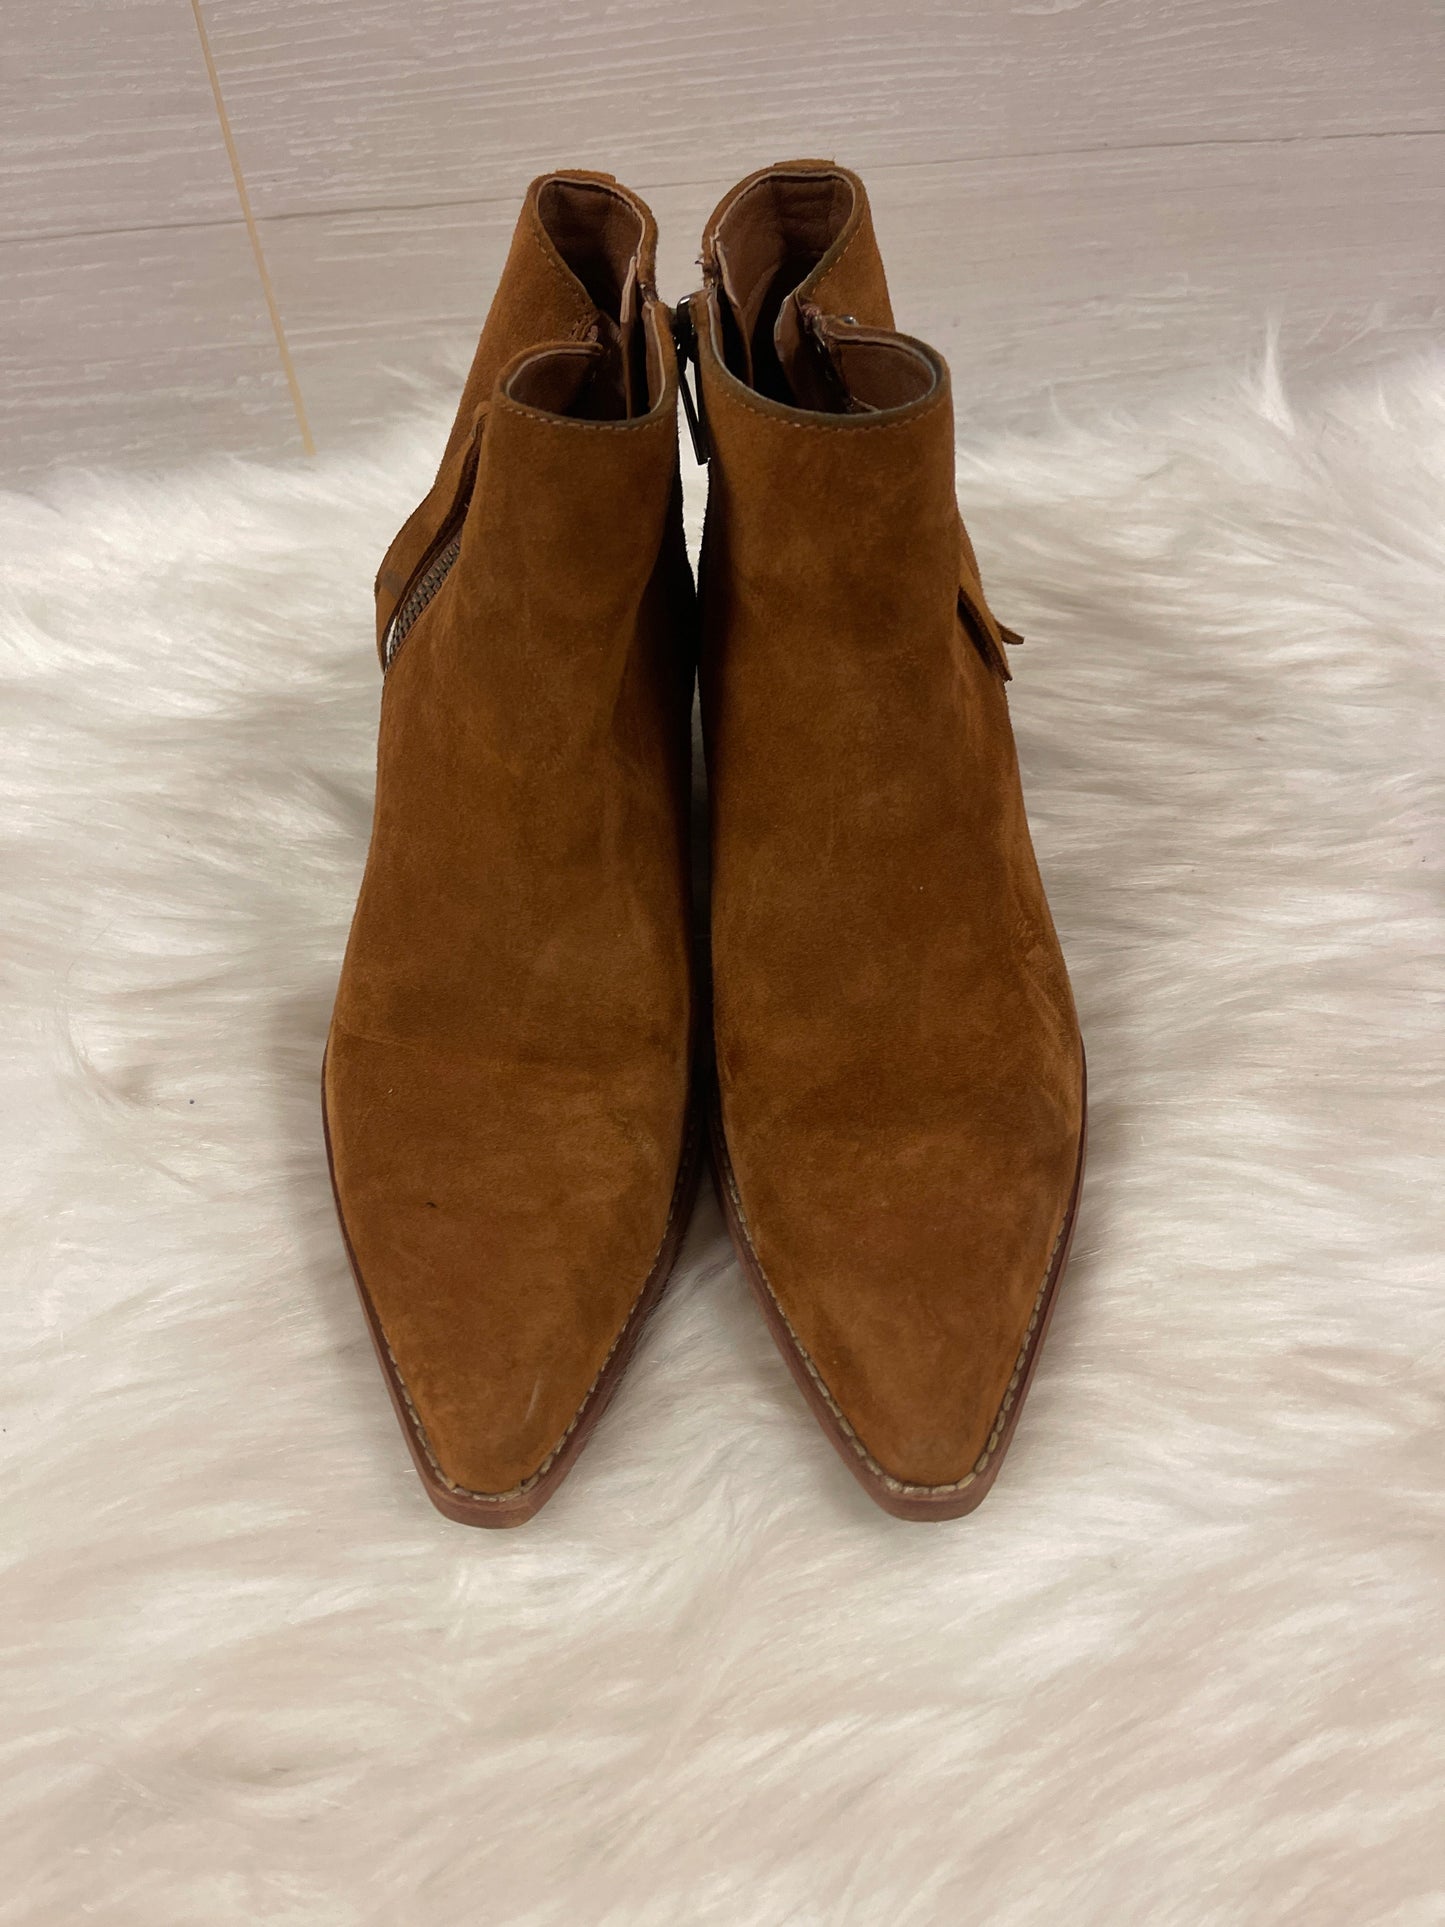 Boots Ankle Flats By Sam Edelman  Size: 7.5